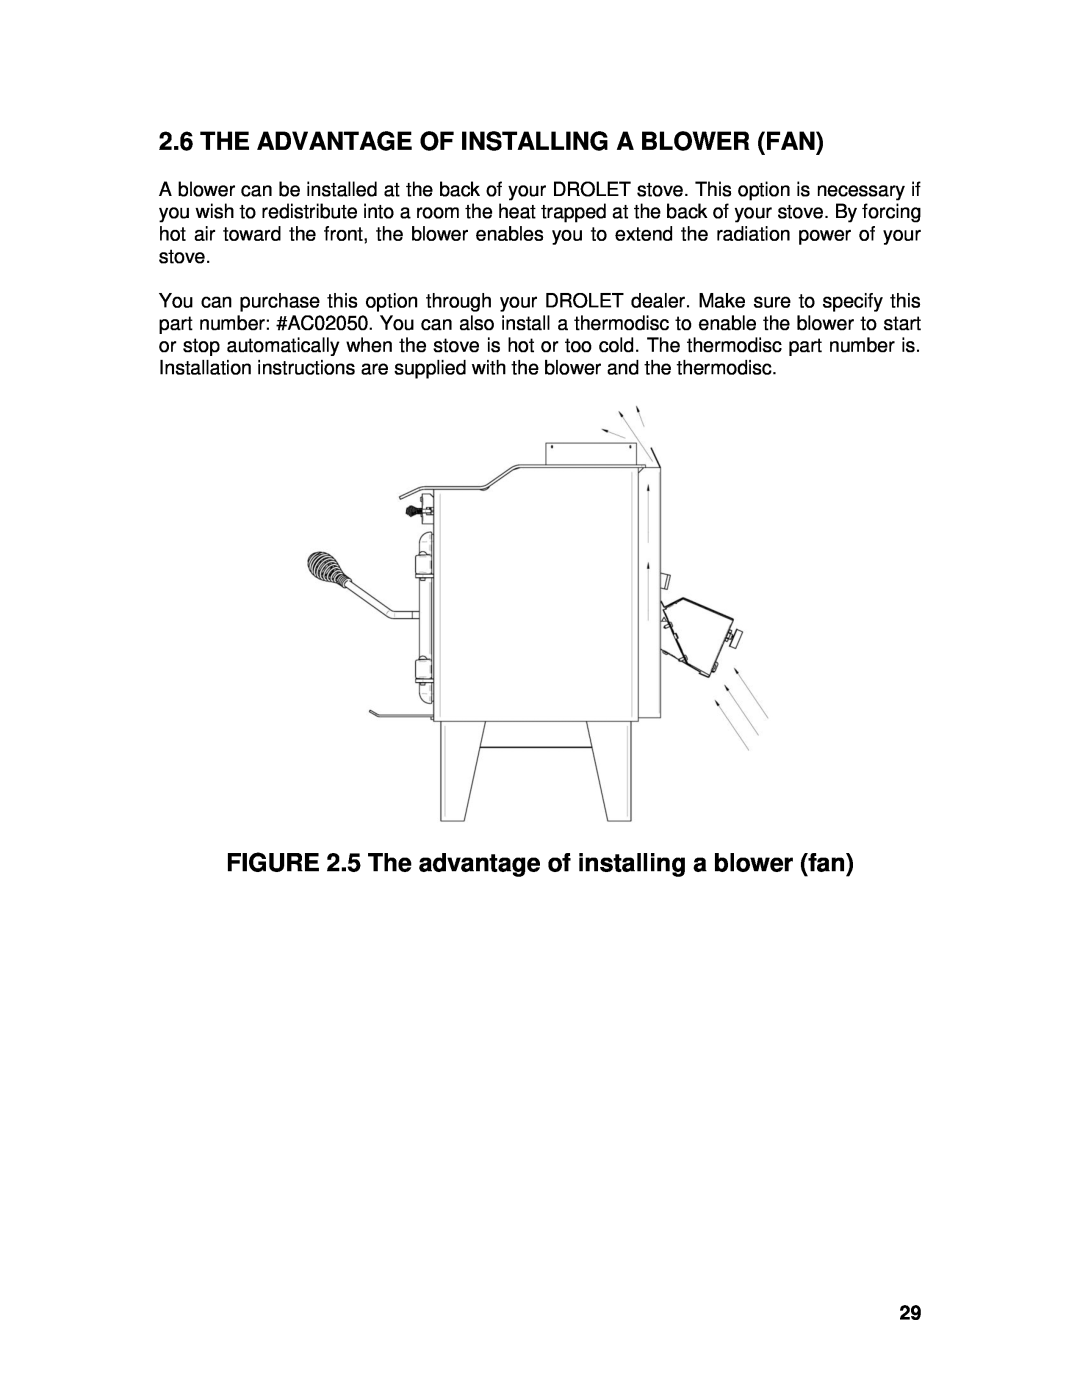 Drolet 45521A owner manual The Advantage Of Installing A Blower Fan, 5 The advantage of installing a blower fan 